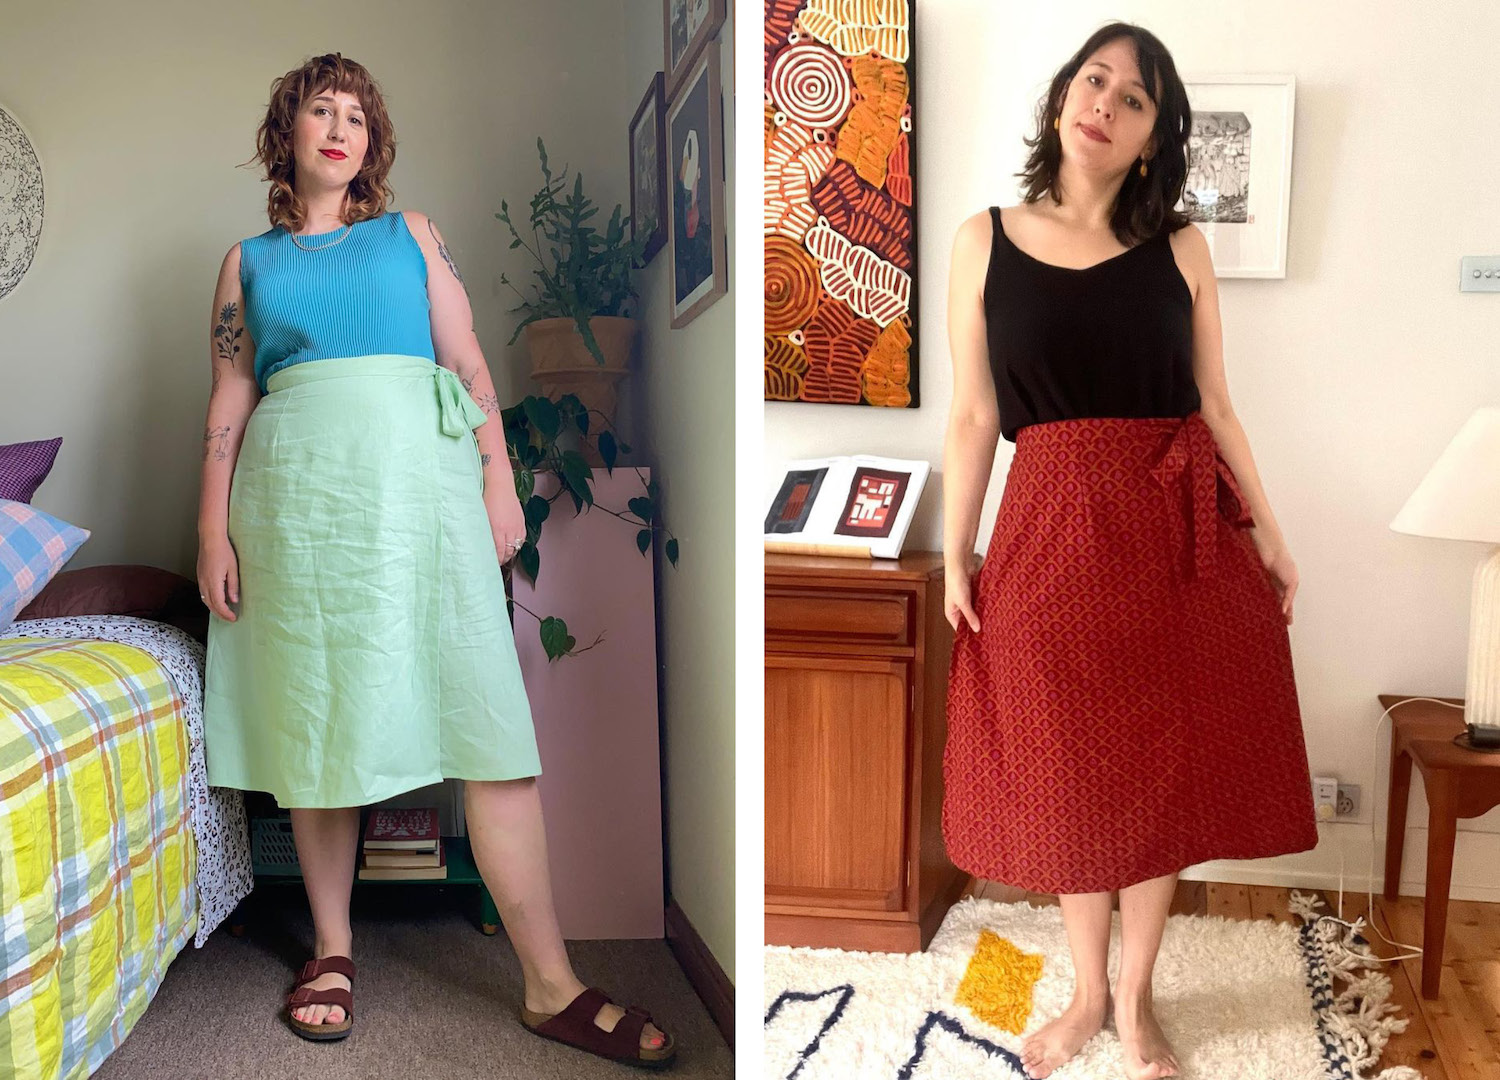 Want to Learn to Sew But Don't Know Where to Start? Hit the Library Pal -  peppermint magazine